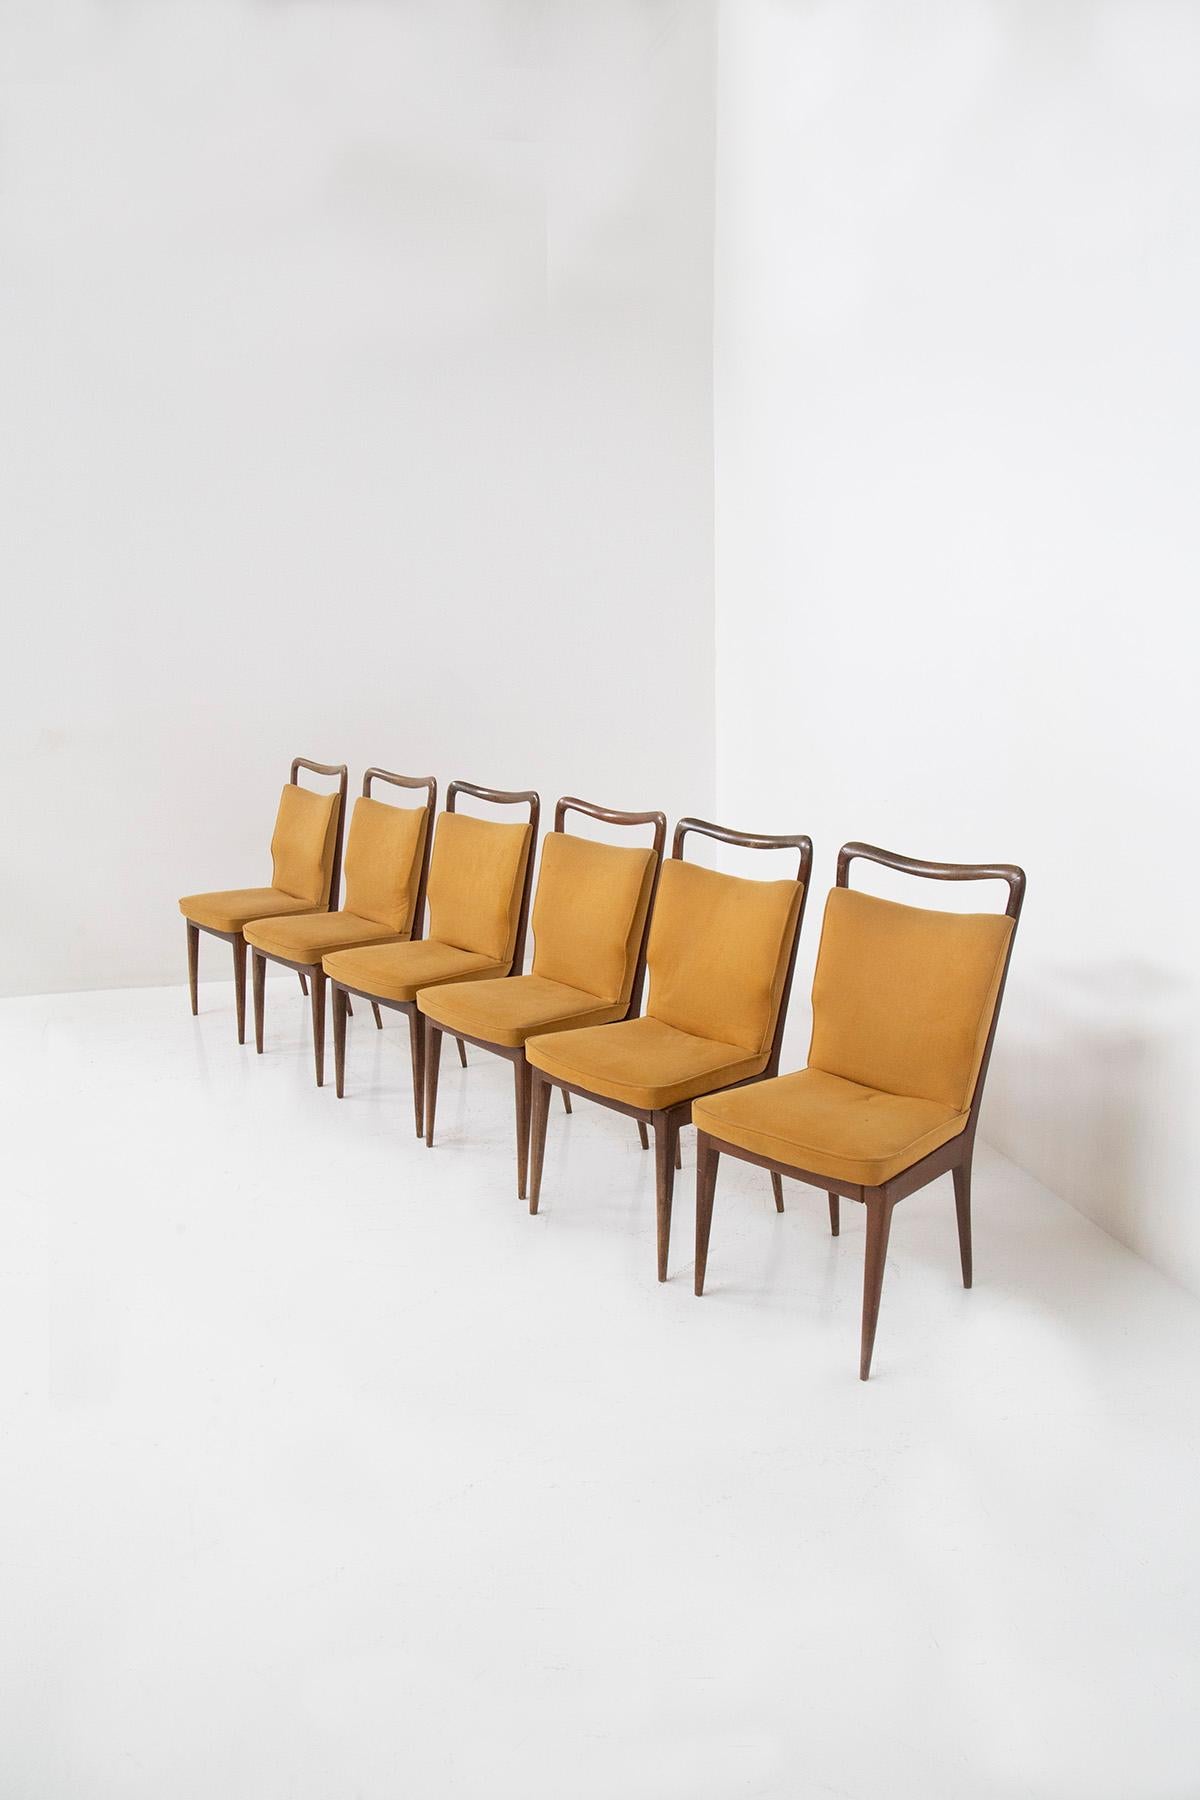 Allow me to take you on a journey to the enchanting world of Italian chairs from the 1950s, crafted by the esteemed ISA BERGAMO manufacture. These chairs exude a timeless charm that captures the essence of elegance and durability, crafted with the